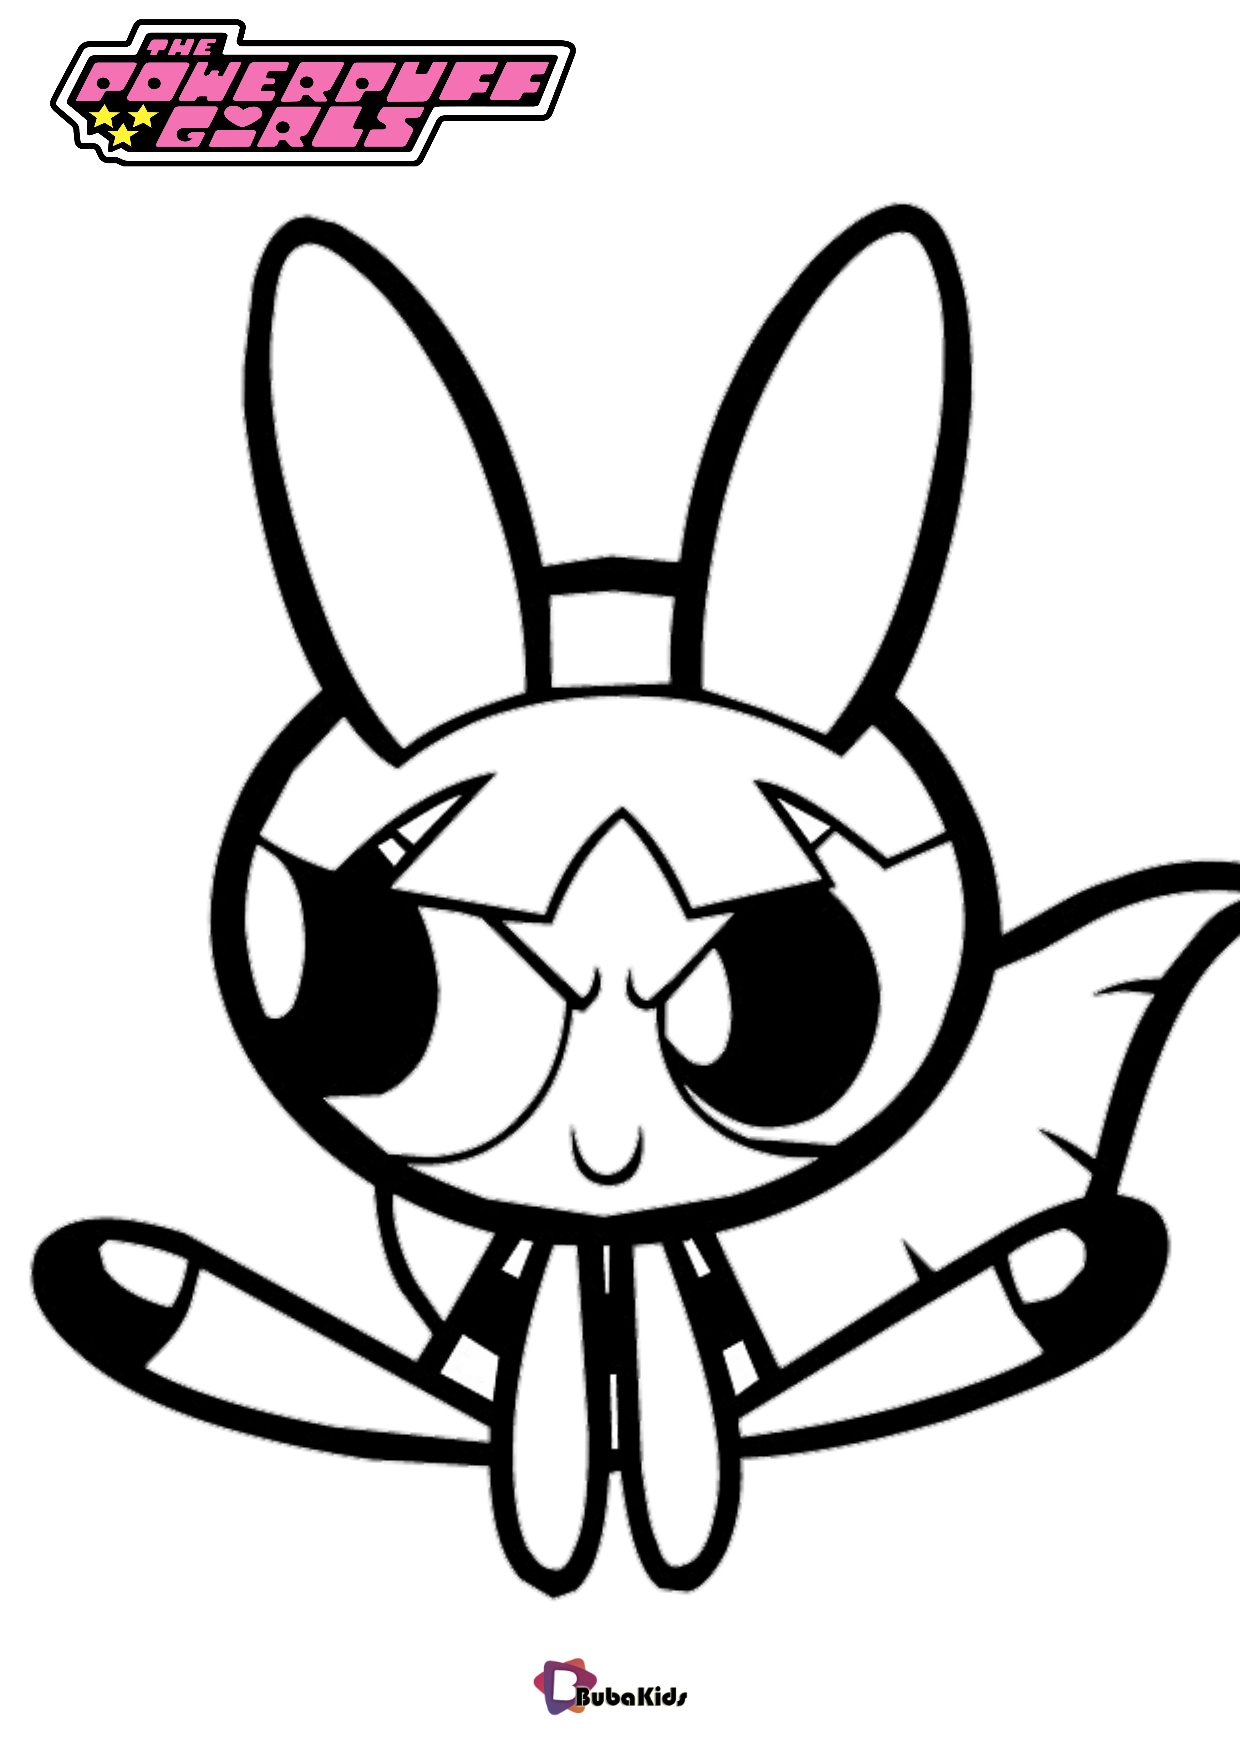 Blossom The Powerpuff girls coloring pages Cartoon Network TV series Wallpaper